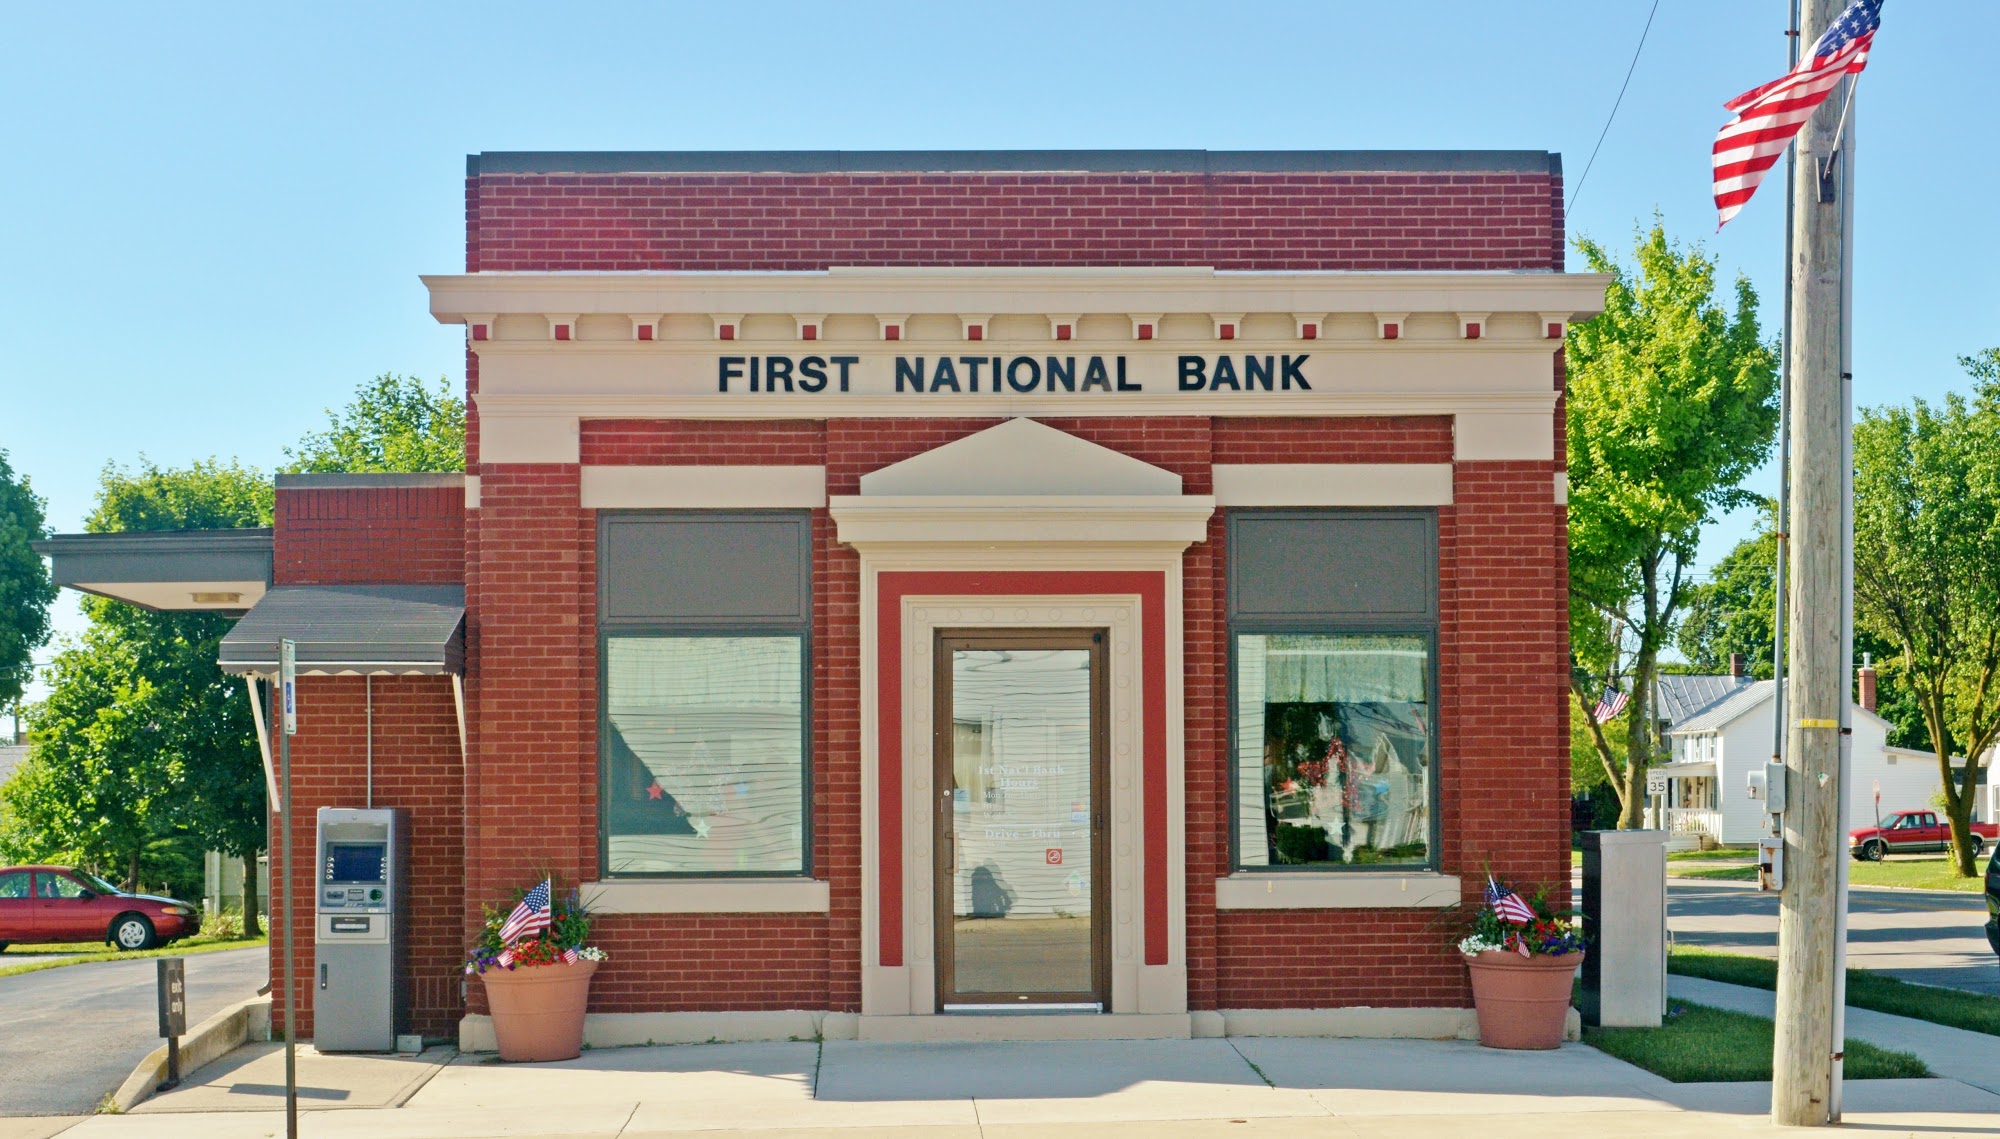 First National Bank of Sycamore-New Riegel Branch